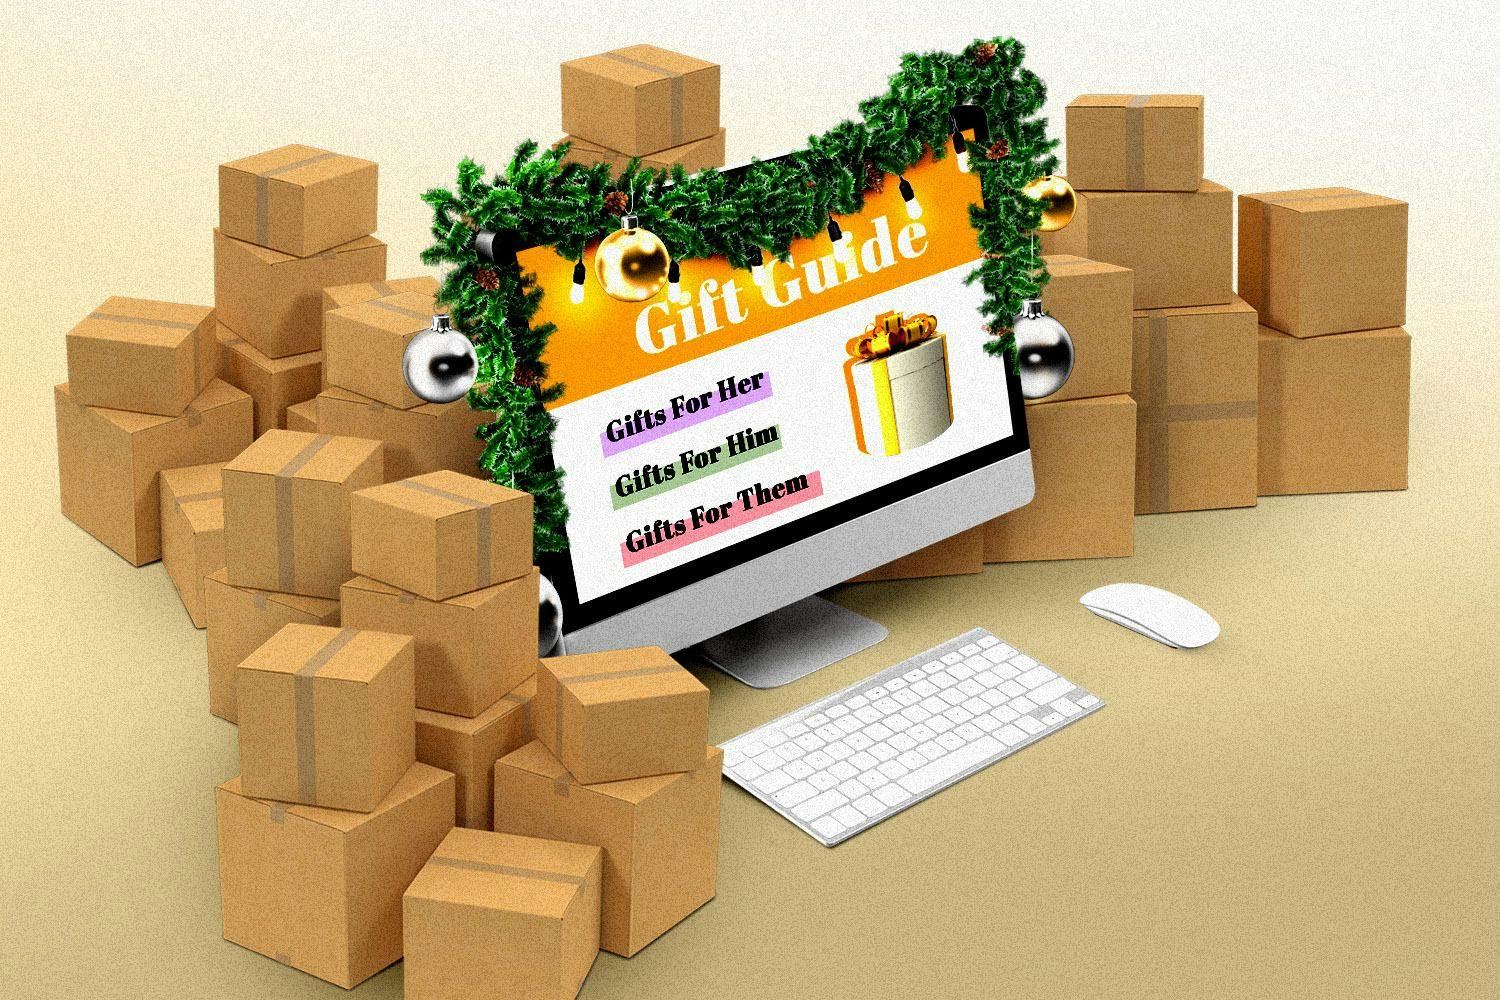 a computer screen that says "Gift Guide" surrounded by boxes